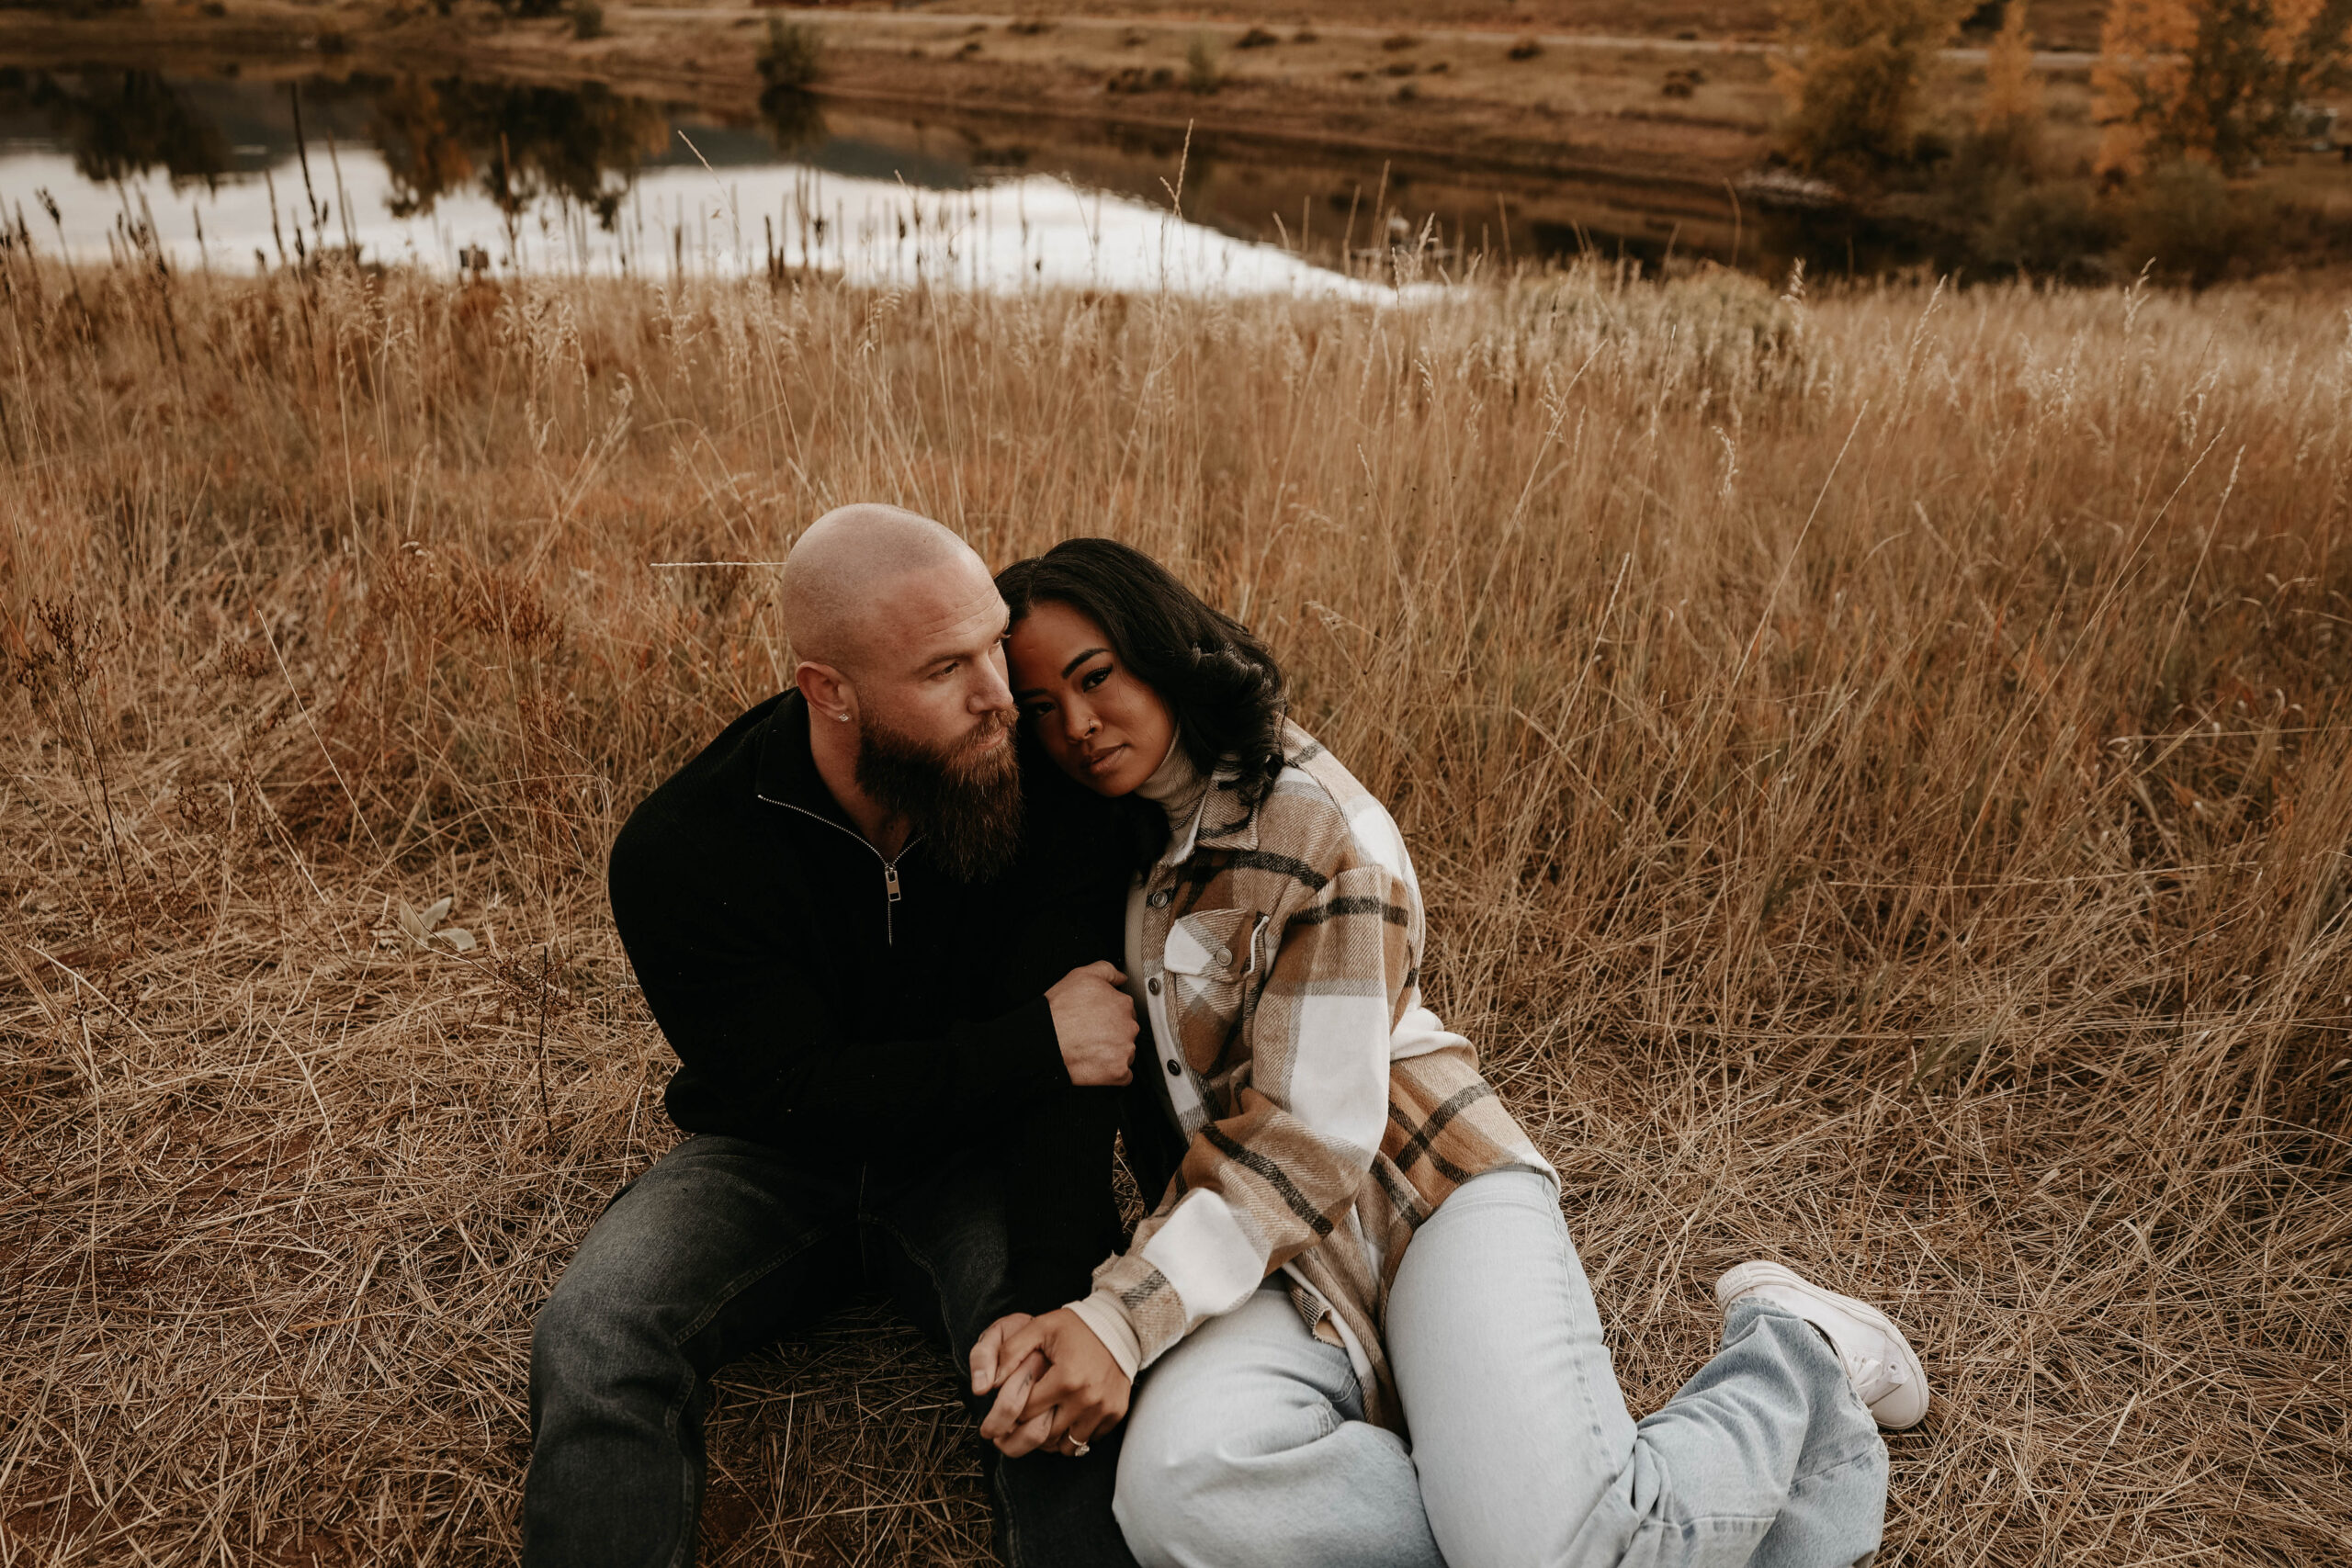 photographers picture of newly engaged couple sitting in the dried grass holding each other during their engagement photos 